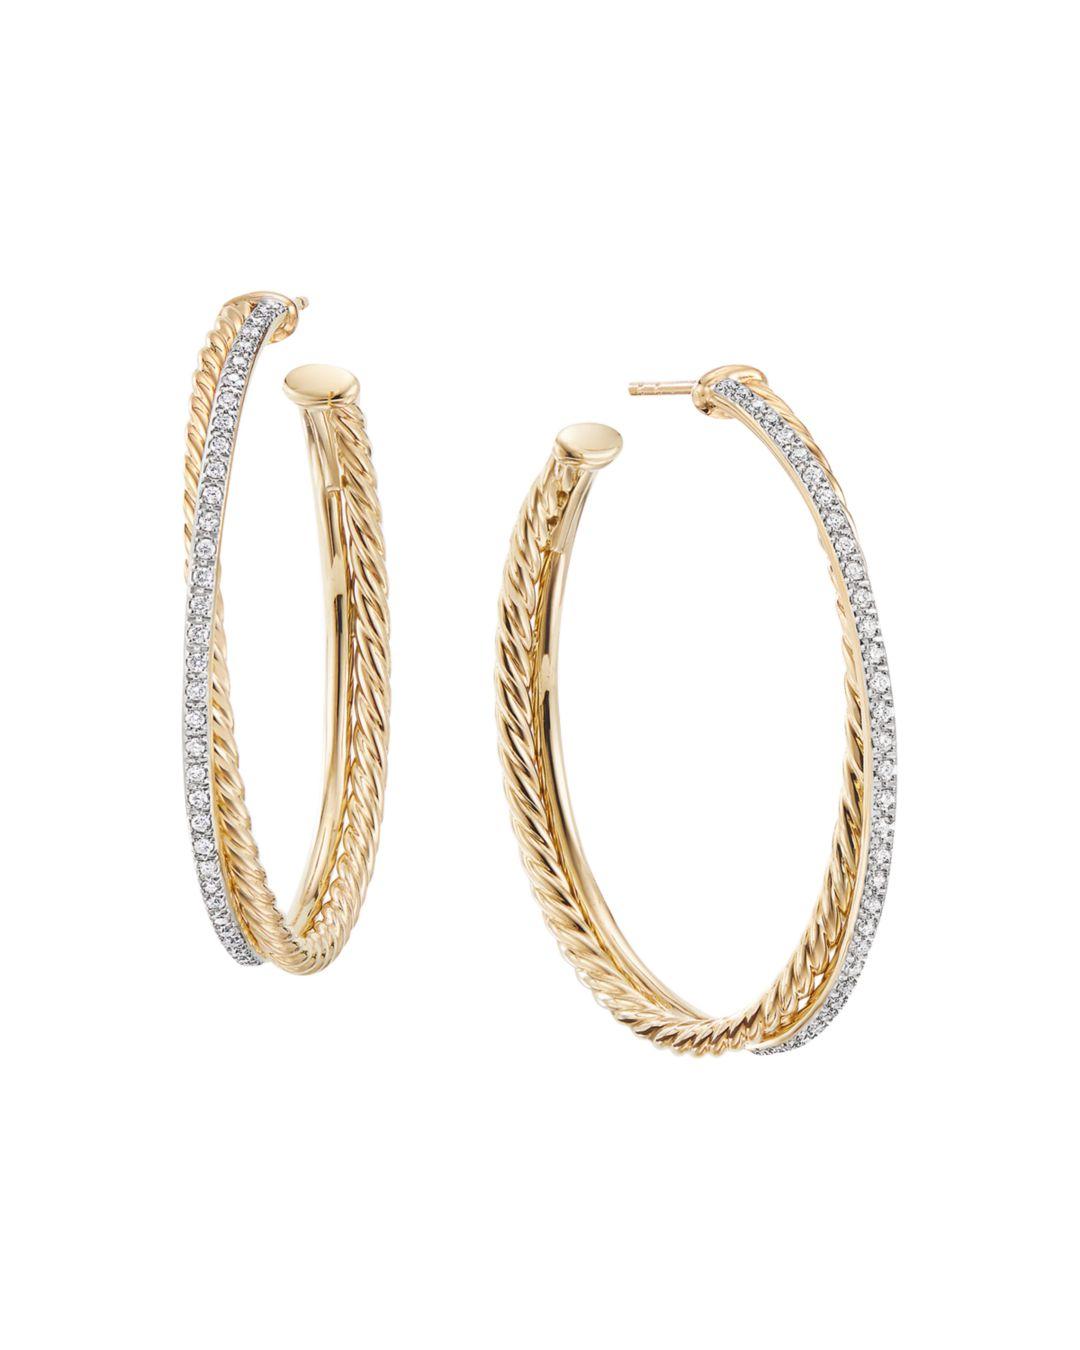 David Yurman WhiteGold Crossover Extra Large Hoop Earrings In 18k Yellow Gold With Diamonds 